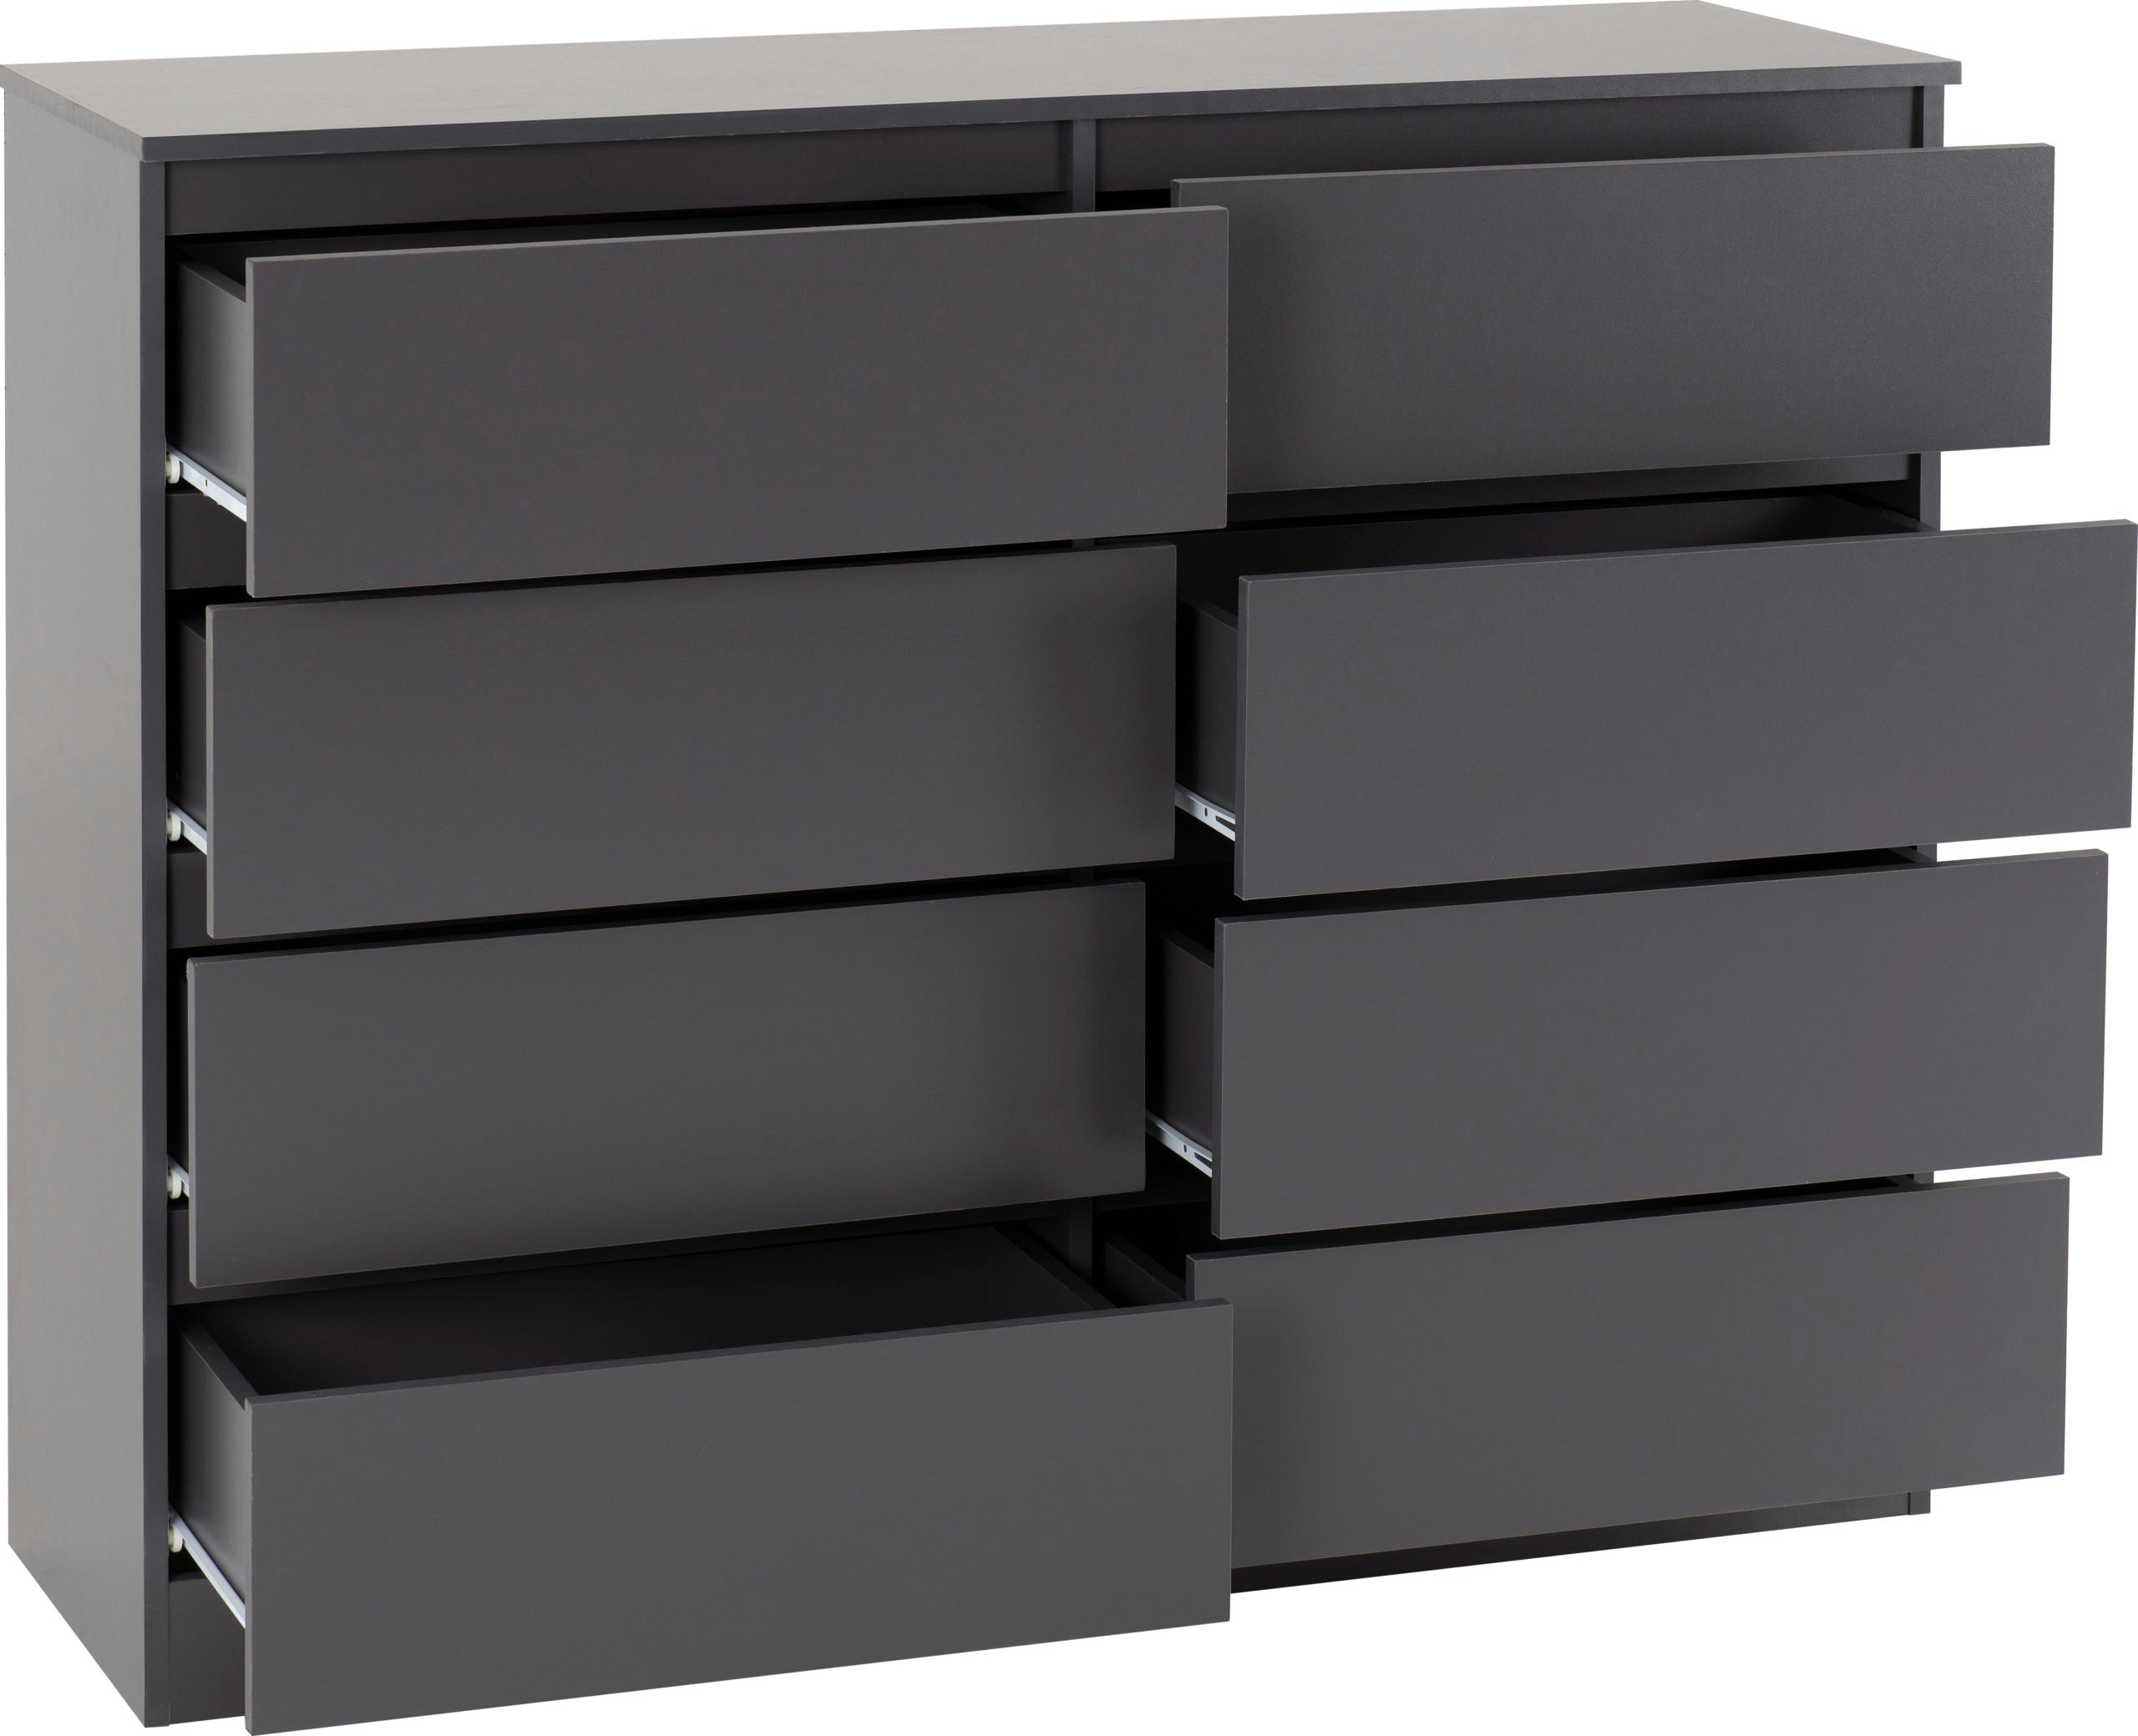 8 drawer chest of drawers grey